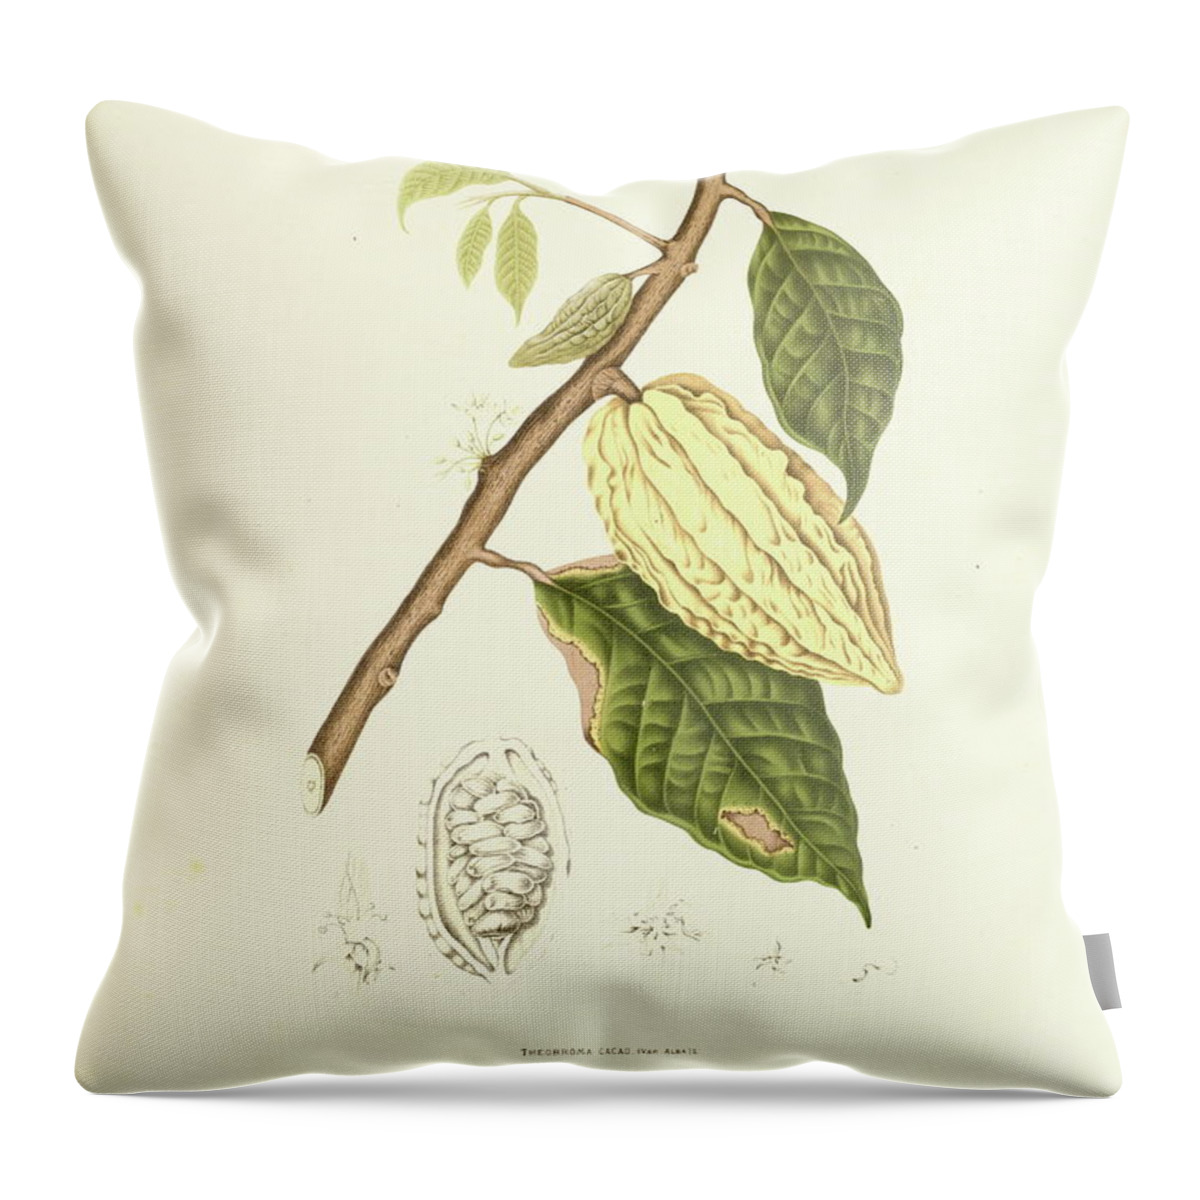 Cacao Tree Throw Pillow featuring the digital art Cocoa Tree | Antique Plant Illustrations by Nicoolay